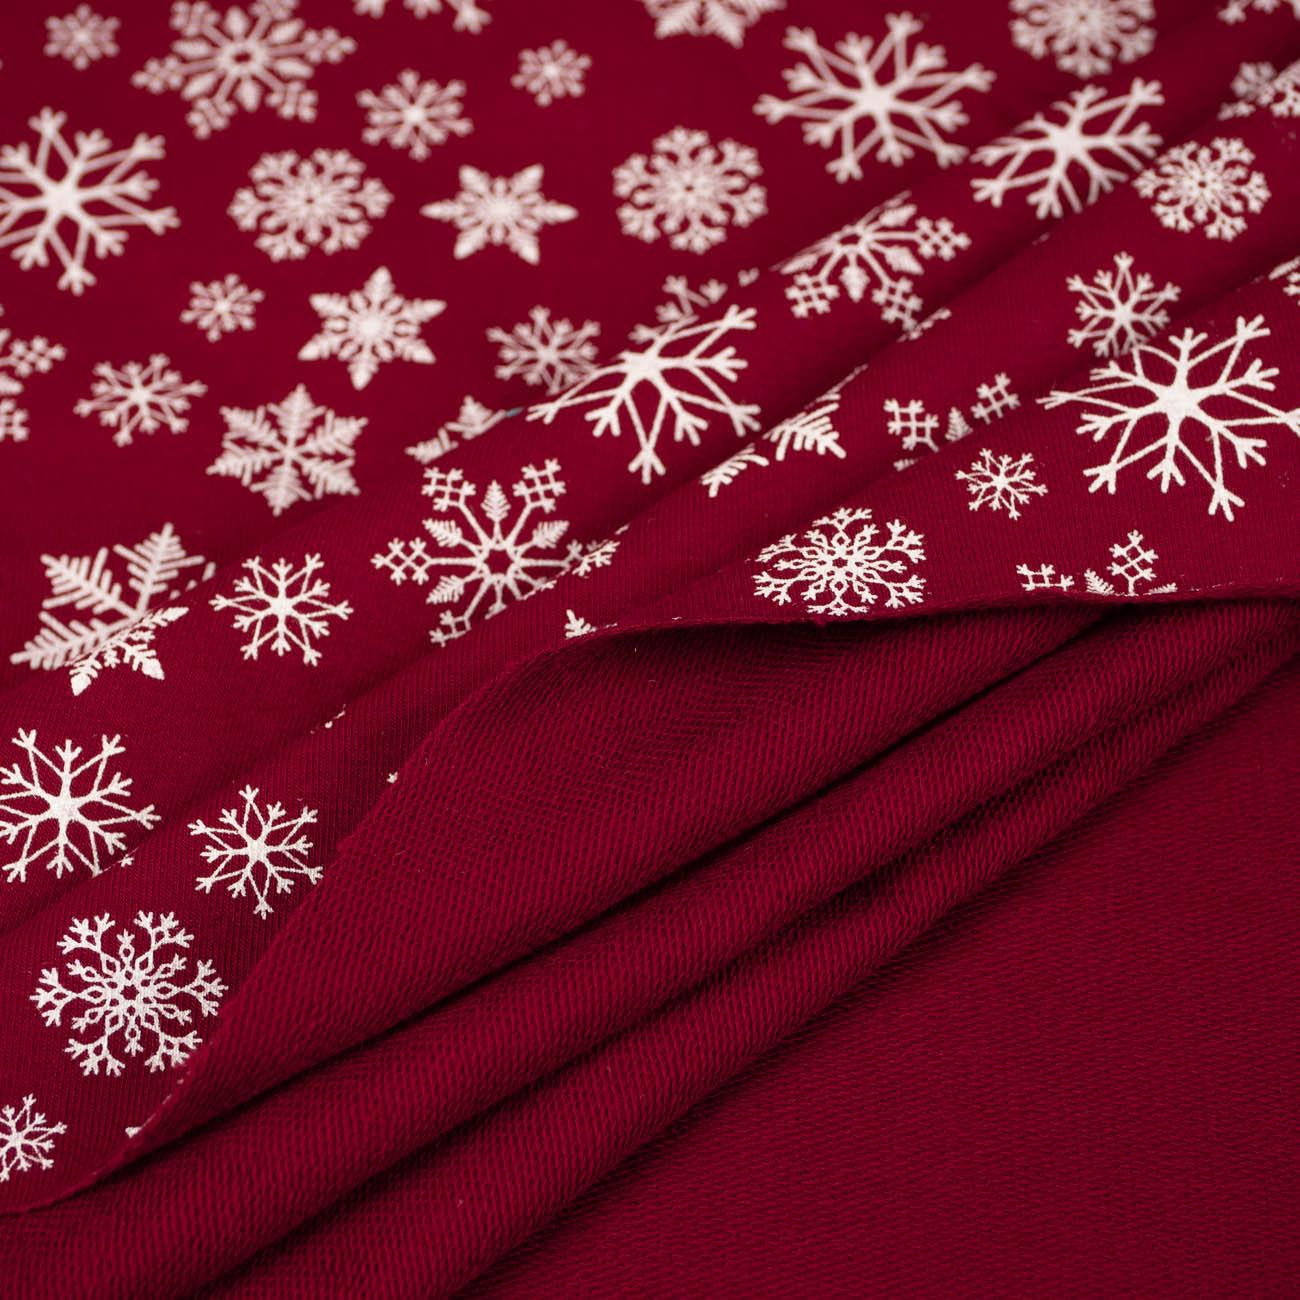 SNOWFLAKES / burgundy - French terry with elastane 